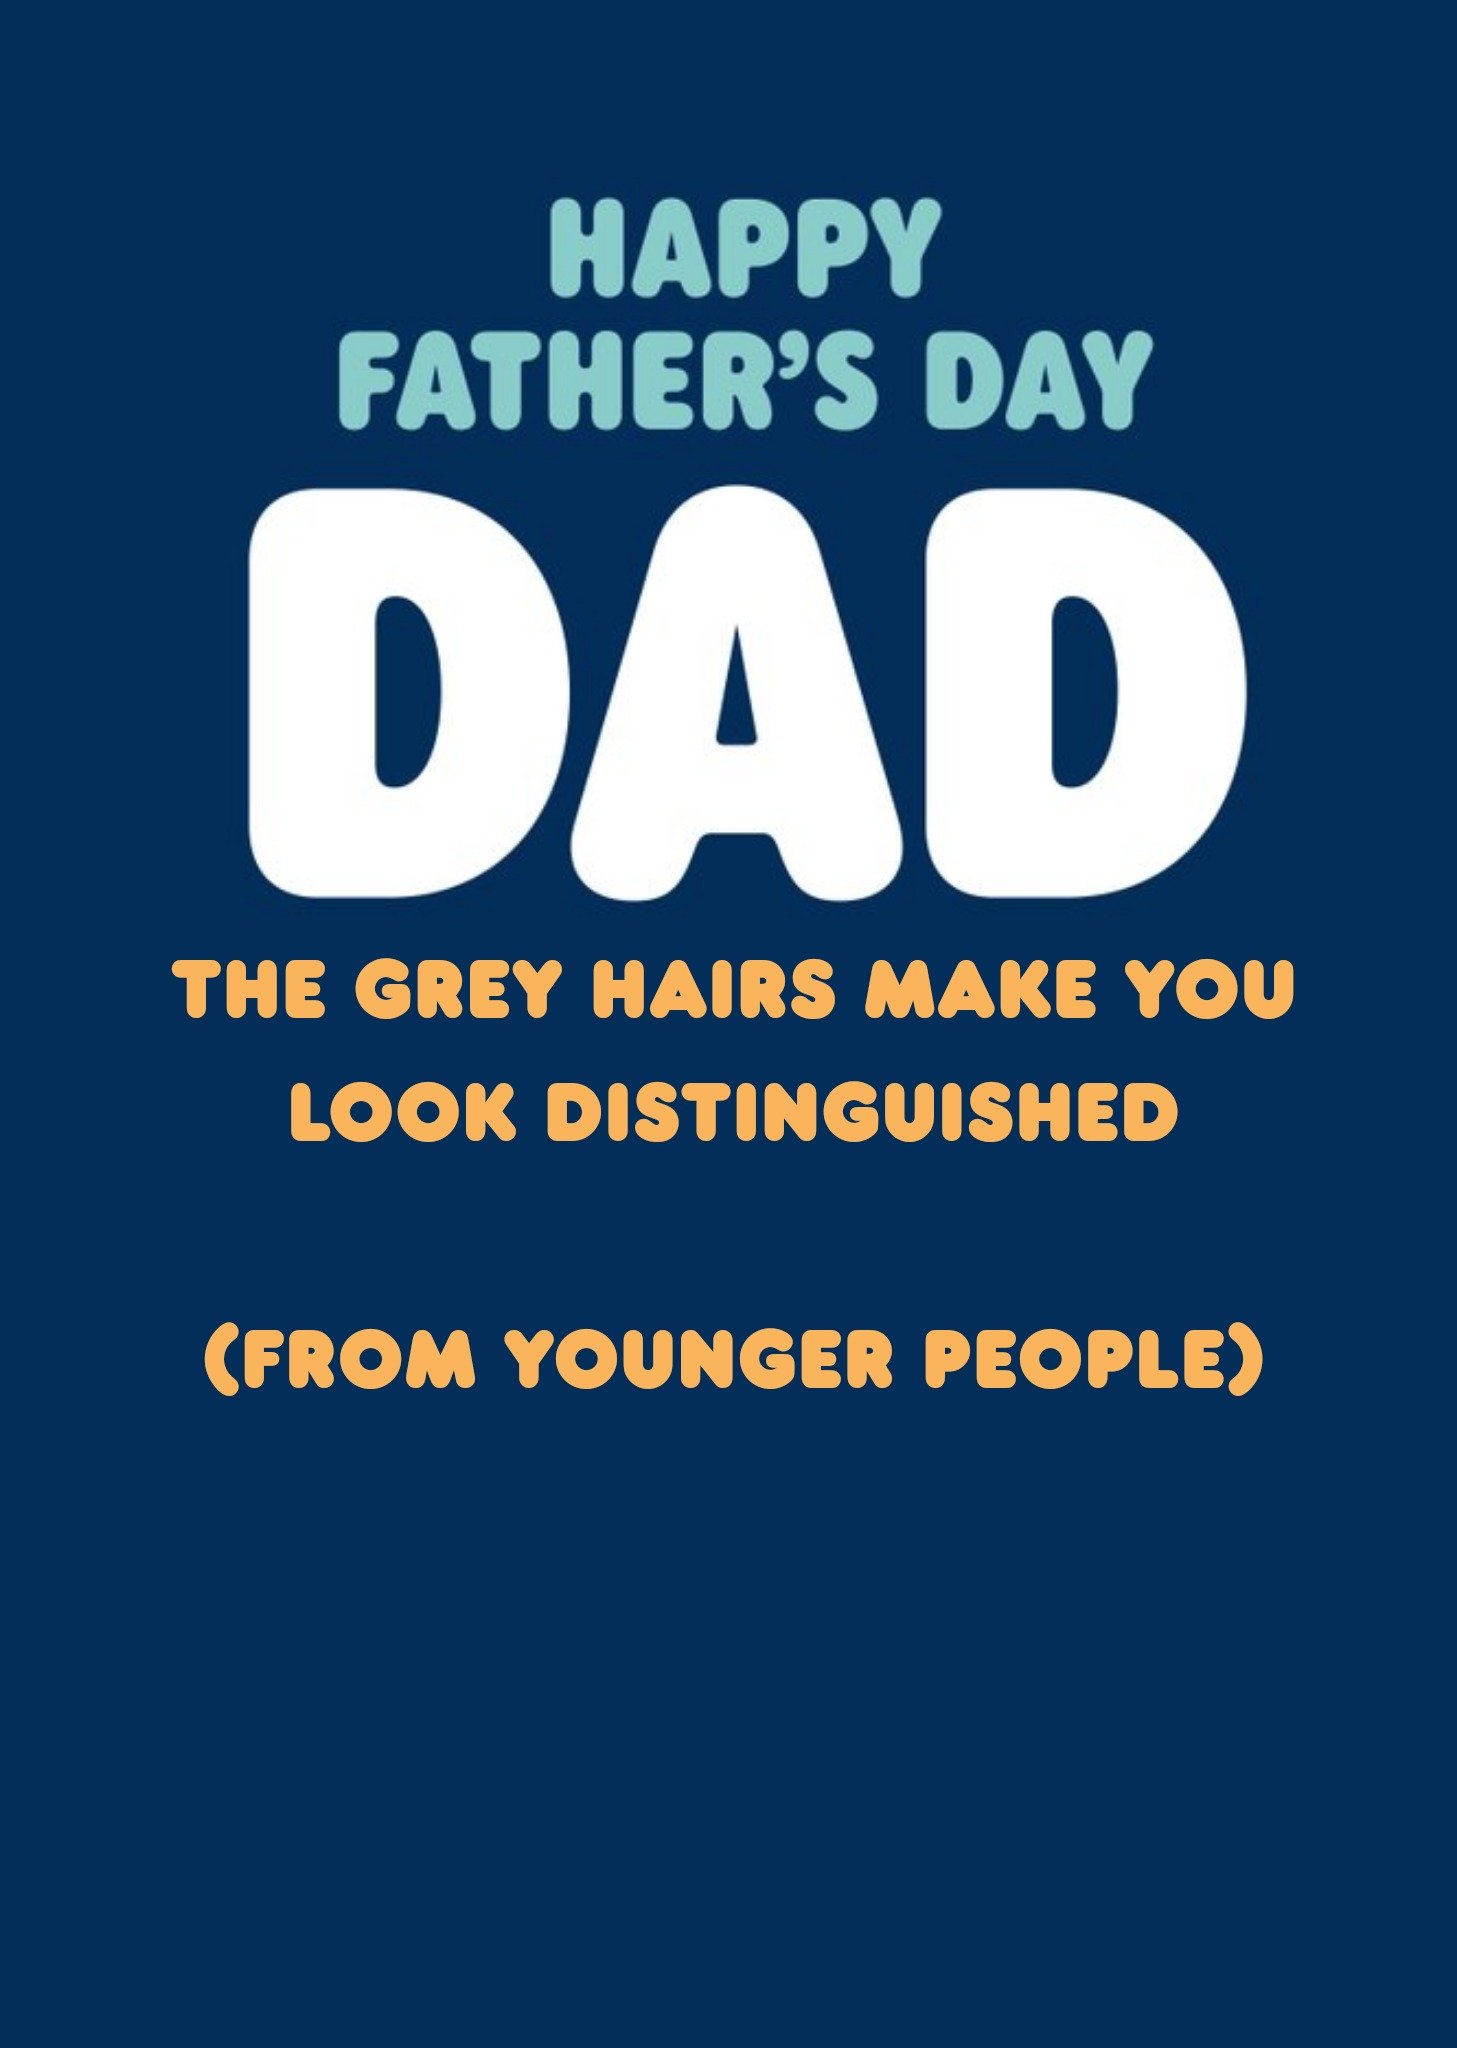 Moonpig Grey Hairs Funny Father's Day Card Ecard